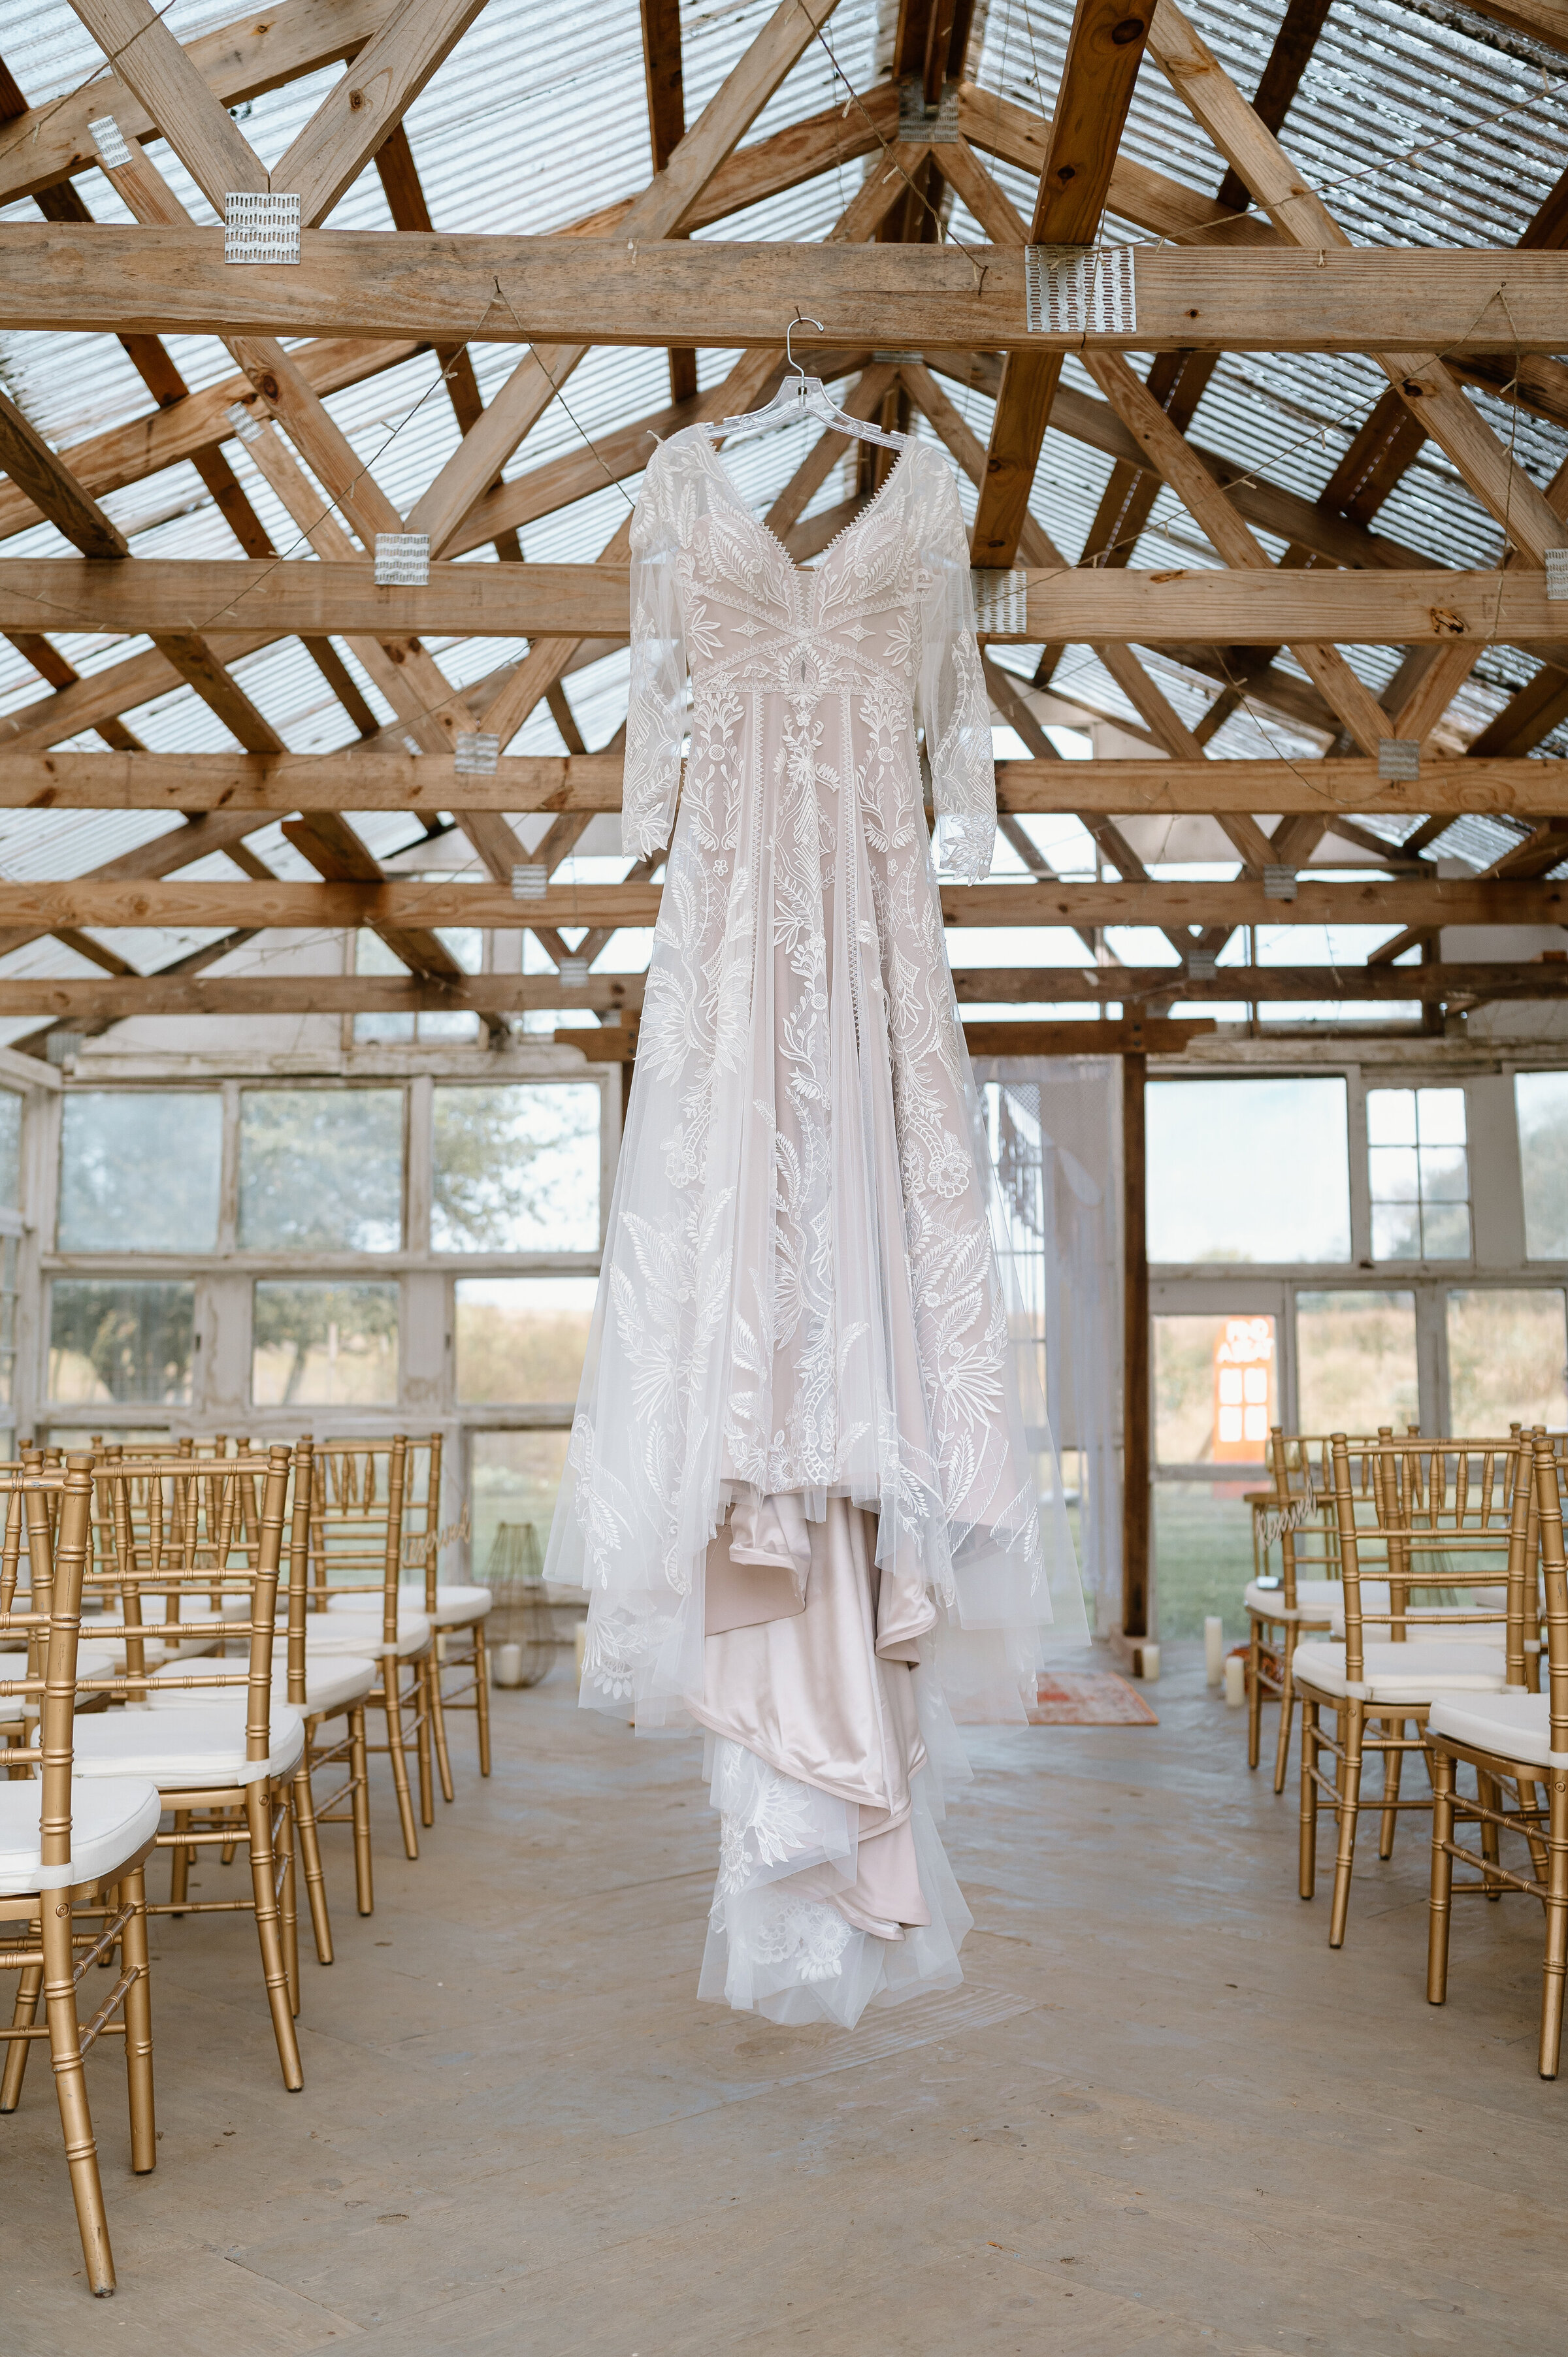 Bridal gown hanging from greenhouse